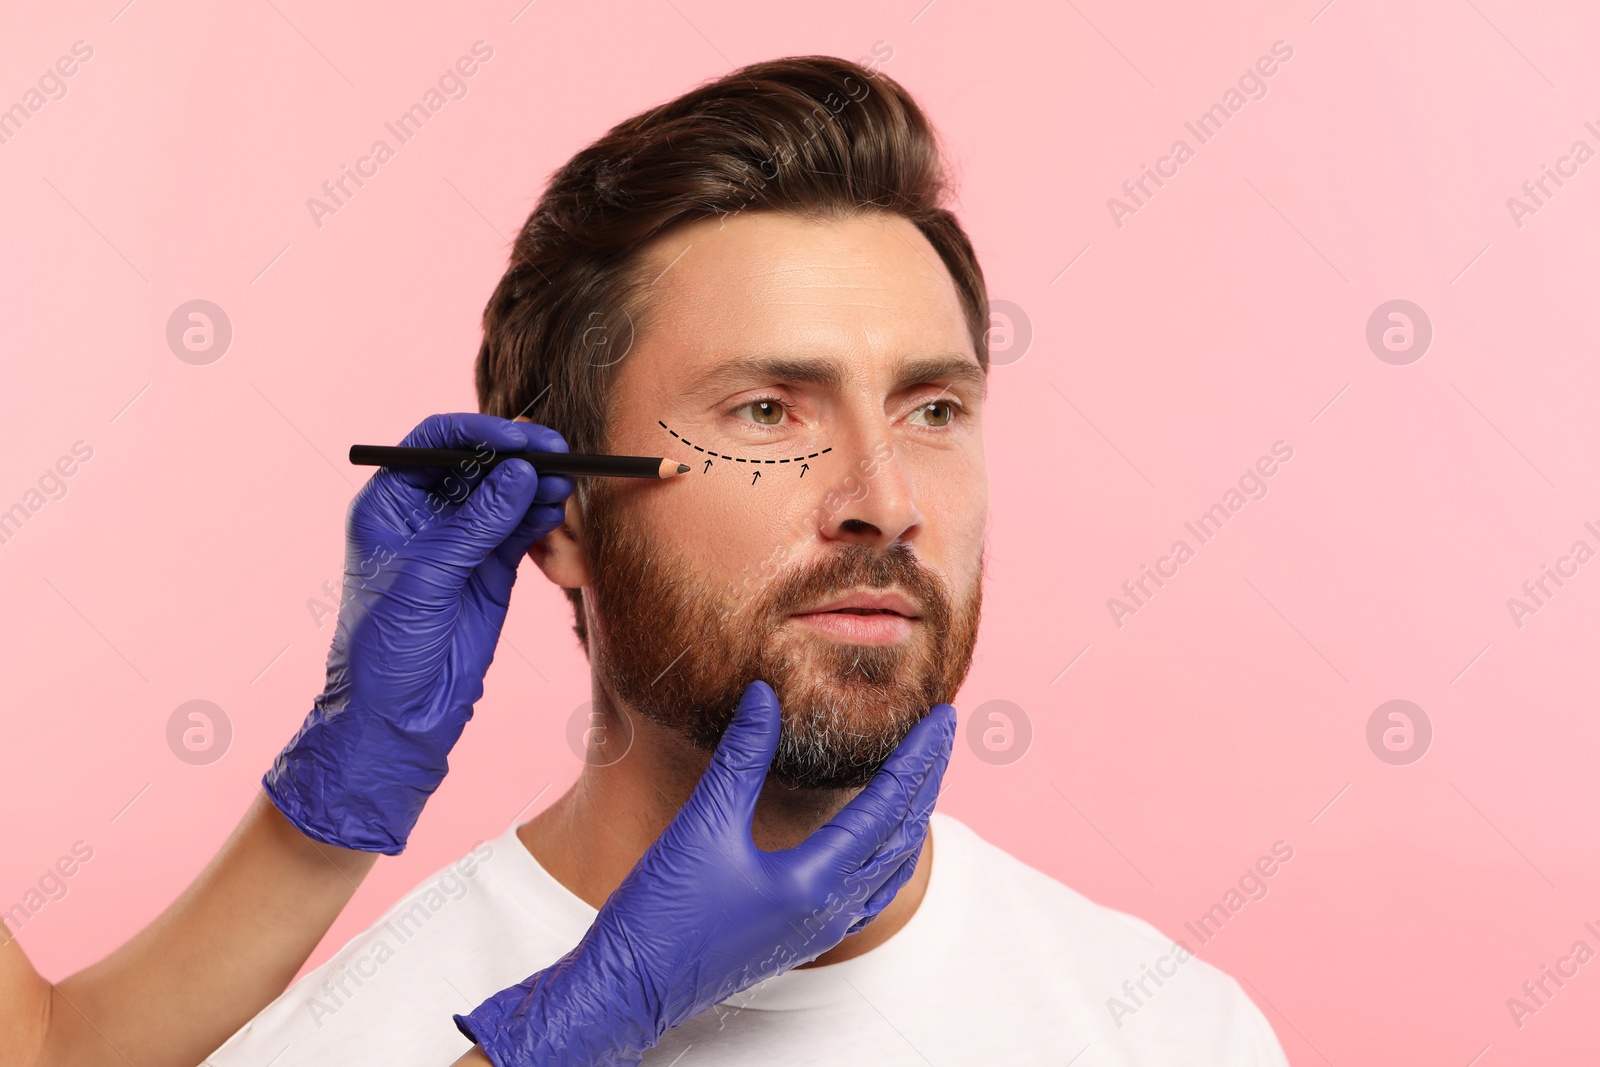 Image of Man preparing for cosmetic surgery, pink background. Doctor drawing markings on his face, closeup